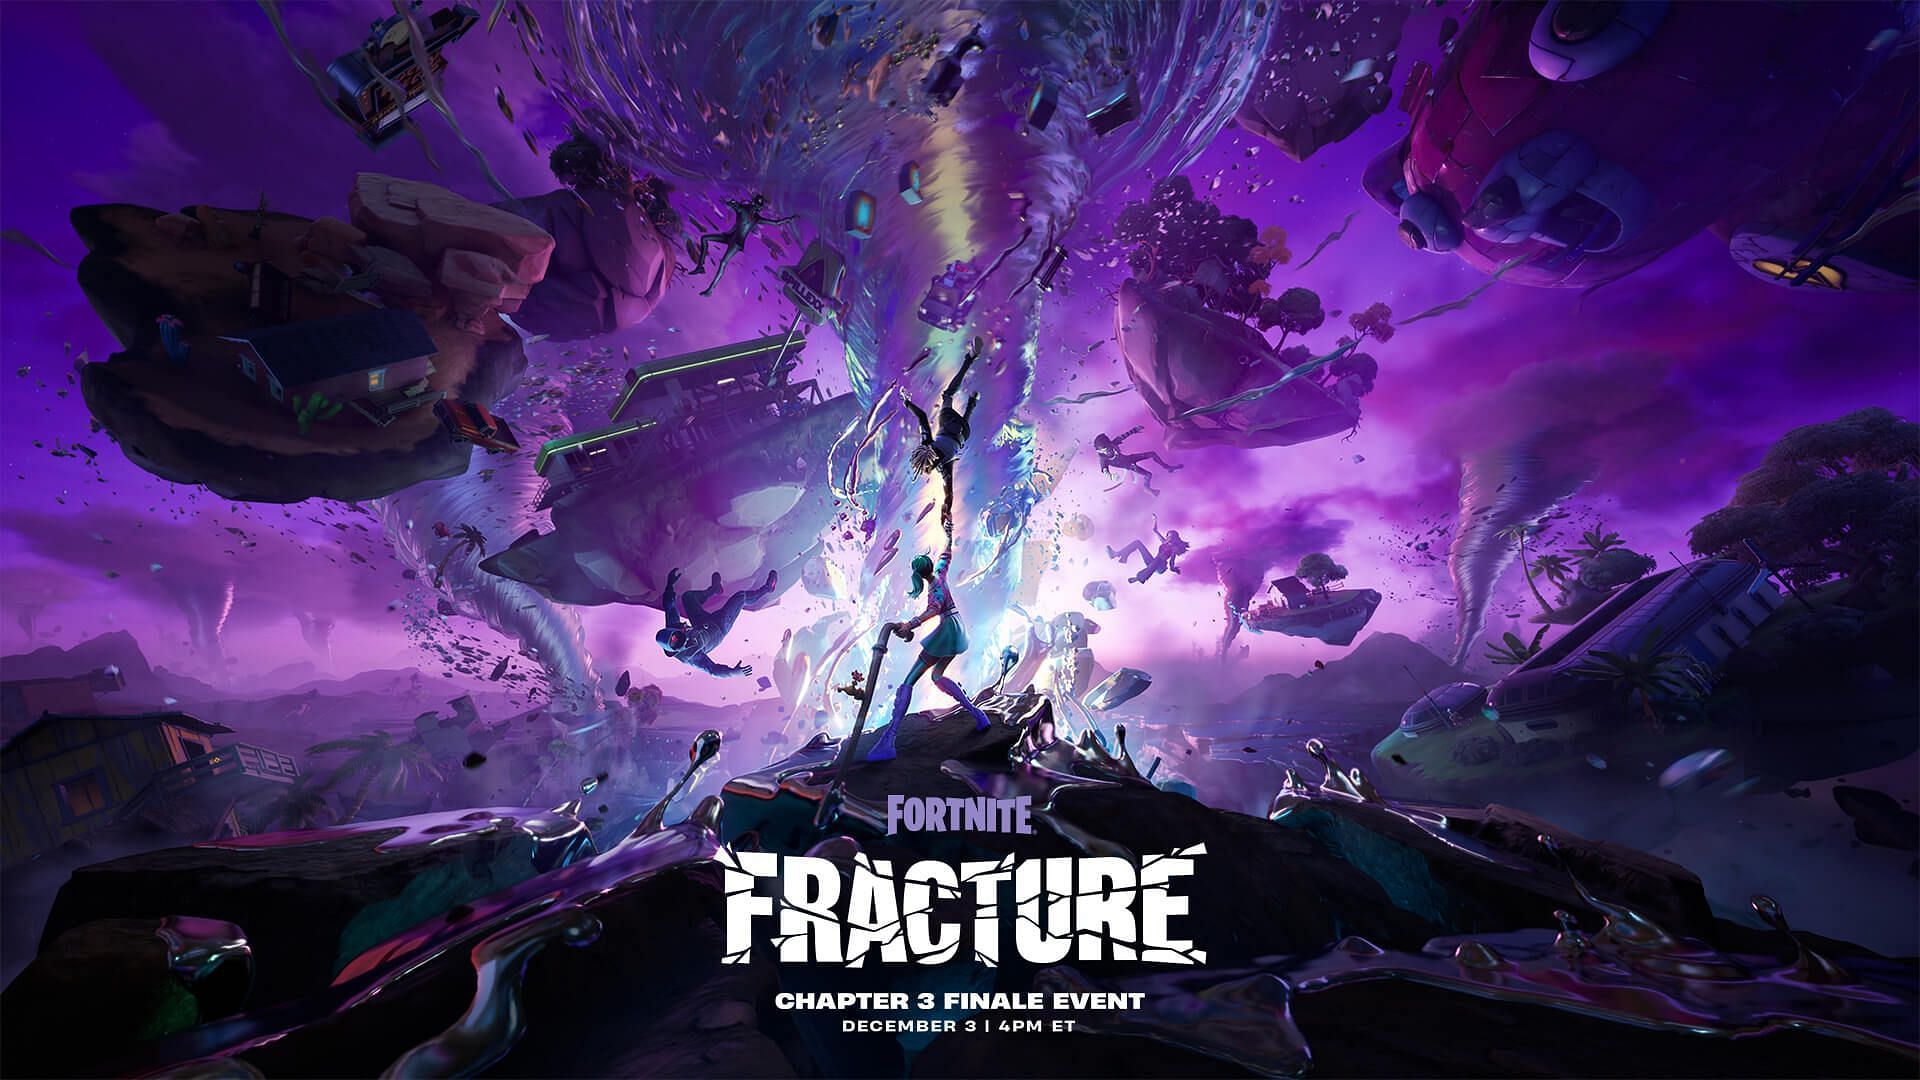 Live event leaks show what will happen during &quot;Fracture&quot; (Image via Epic Games)